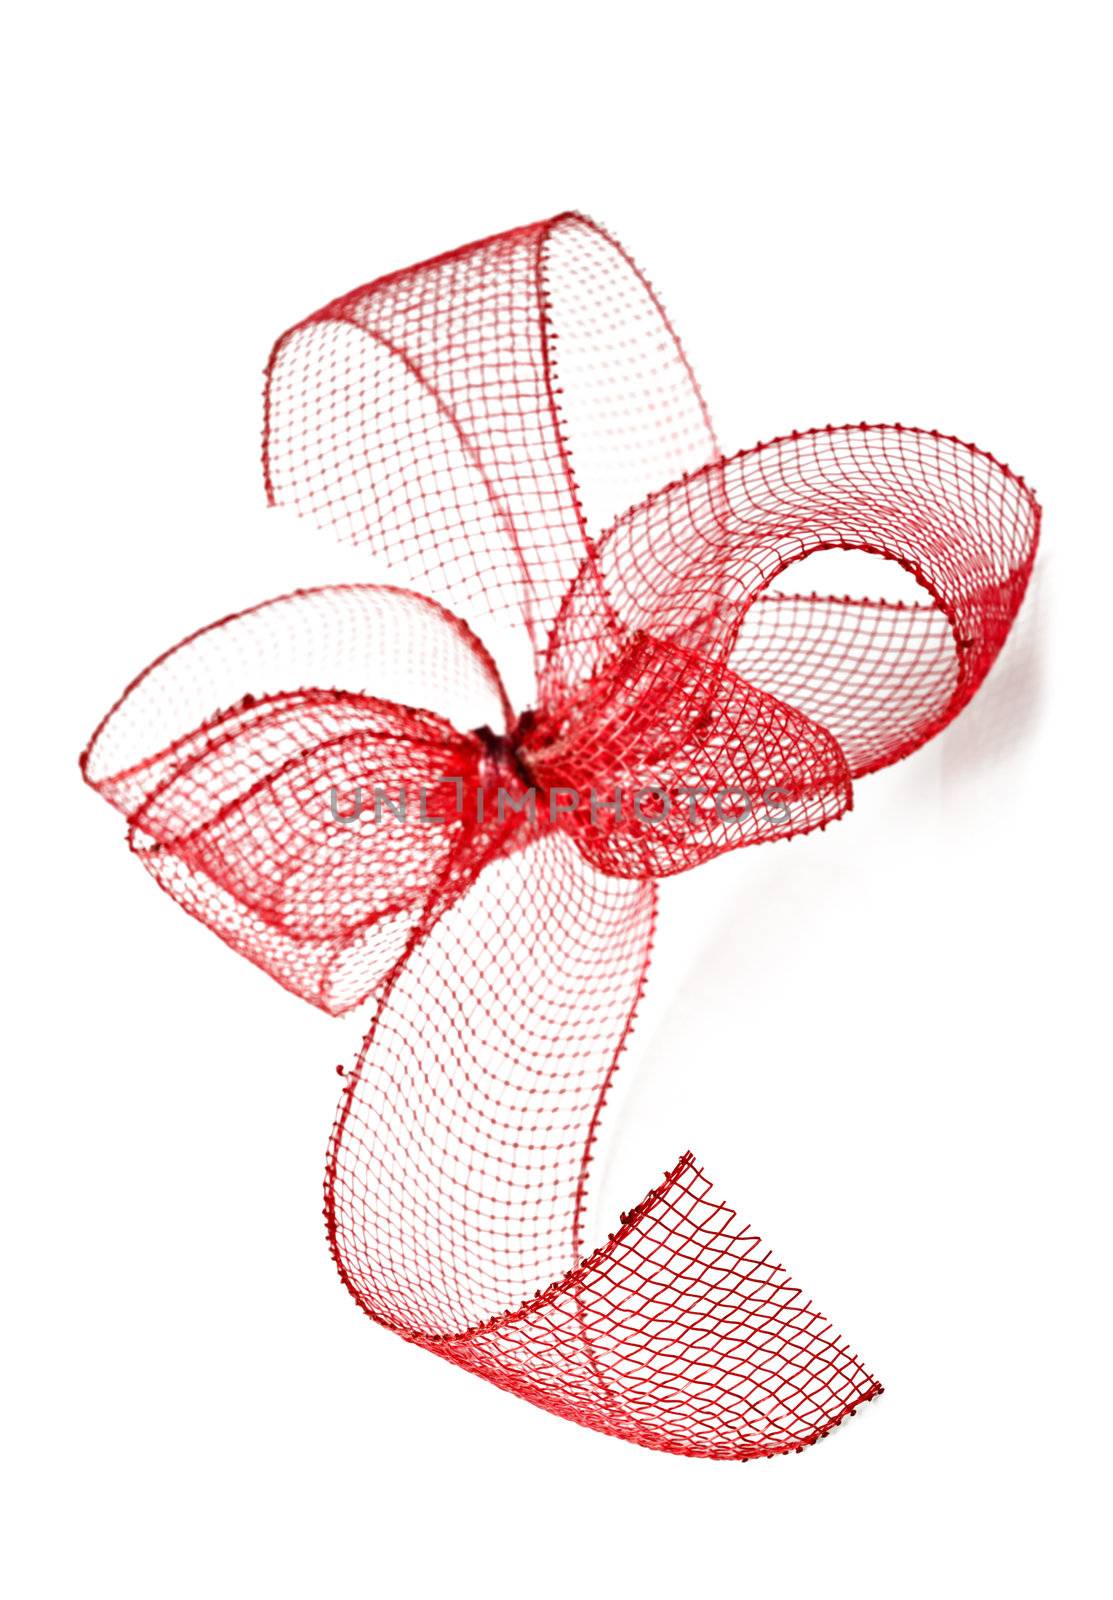 Red ribbon bow on a white background by tish1